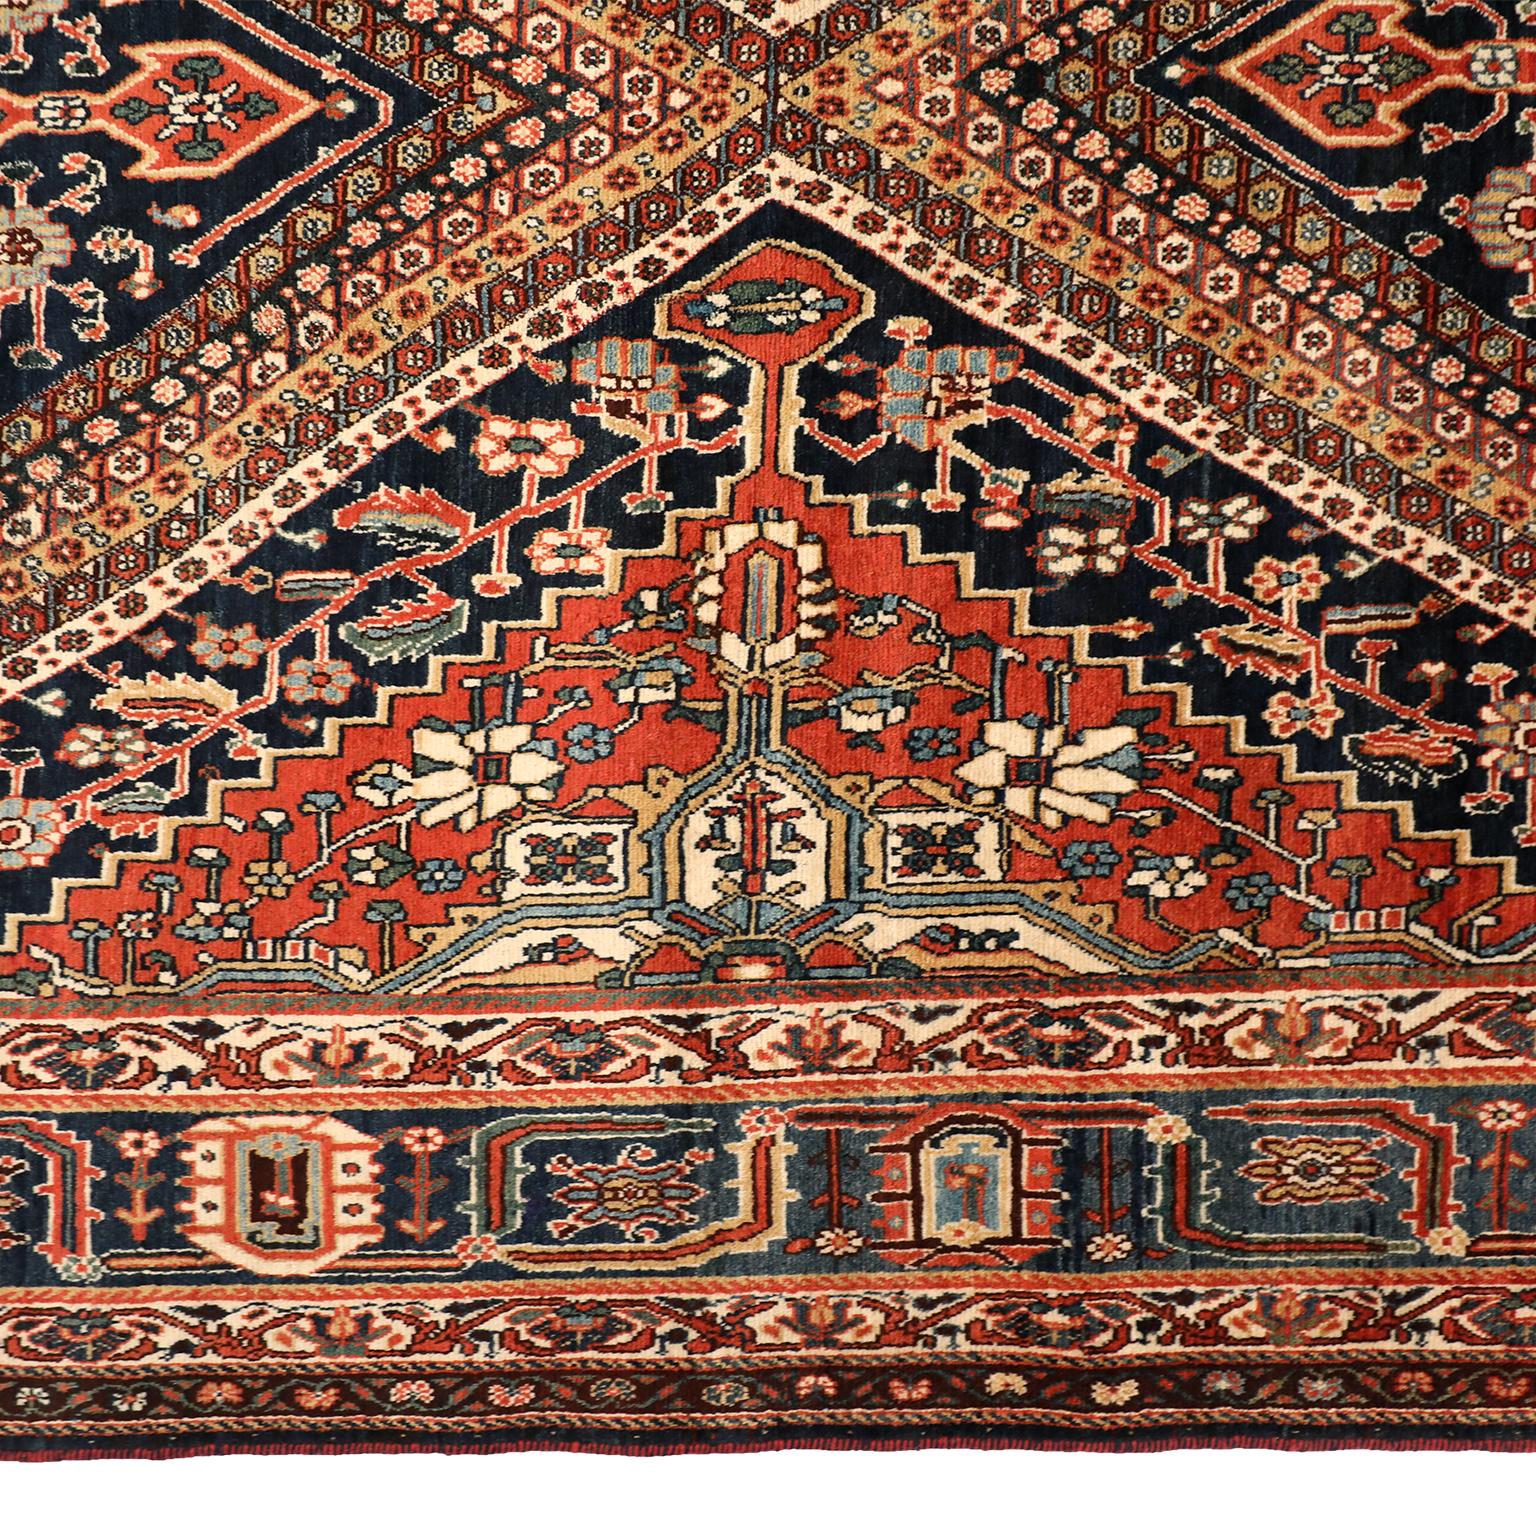 Wool Antique 1920s Qashqai Persian Rug, 11' x 17' For Sale